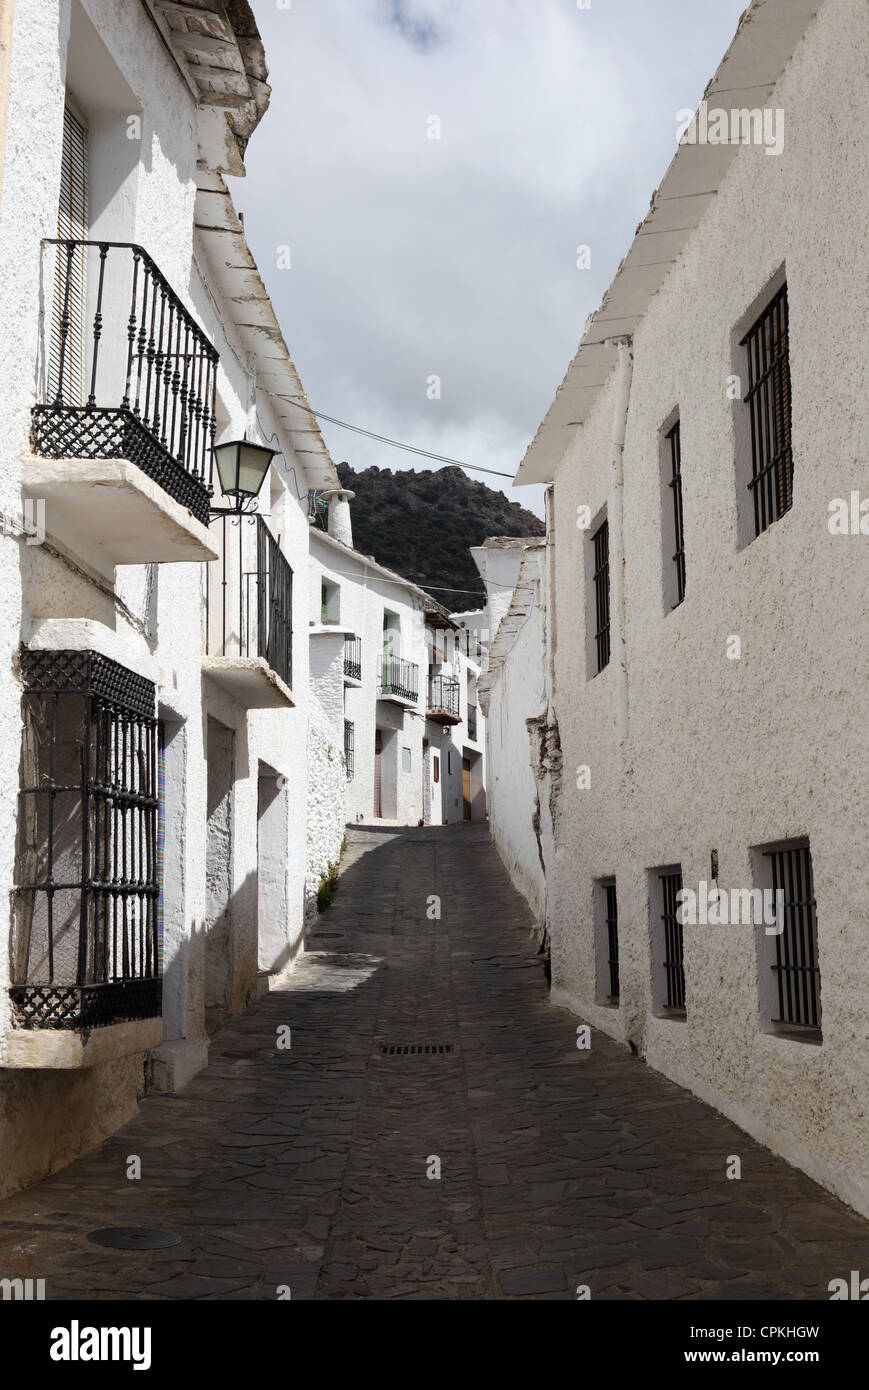 Narrow street in Andalusian village Bubion, Spain Stock Photo